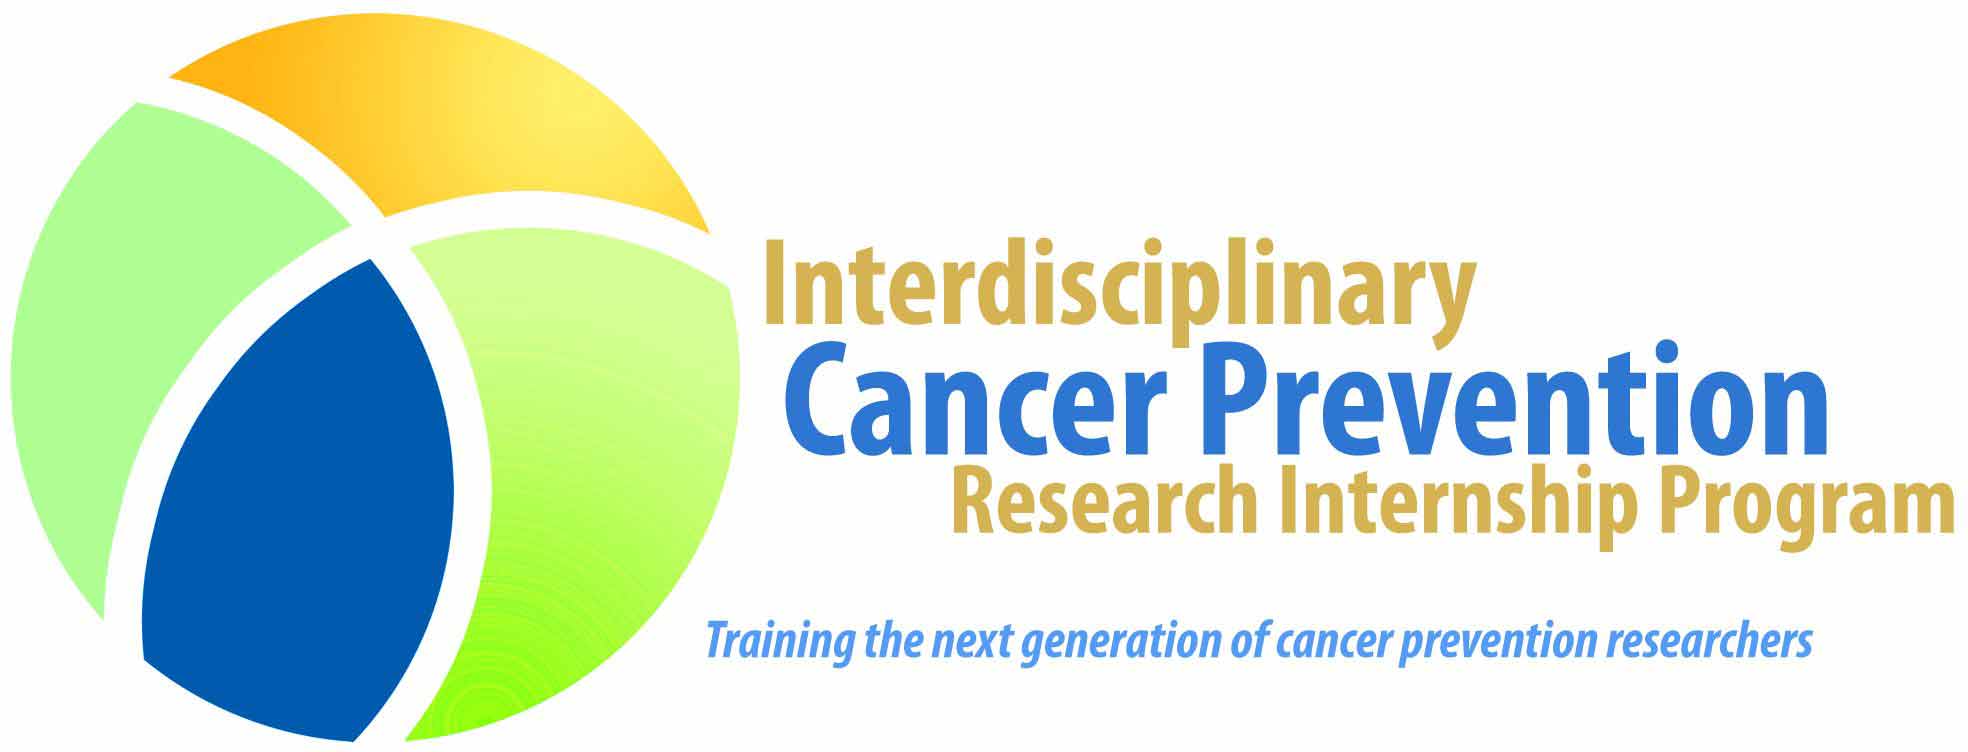 Interdisciplinary Cancer Prevention Research Internship: Training the next generation of cancer prevention researchers